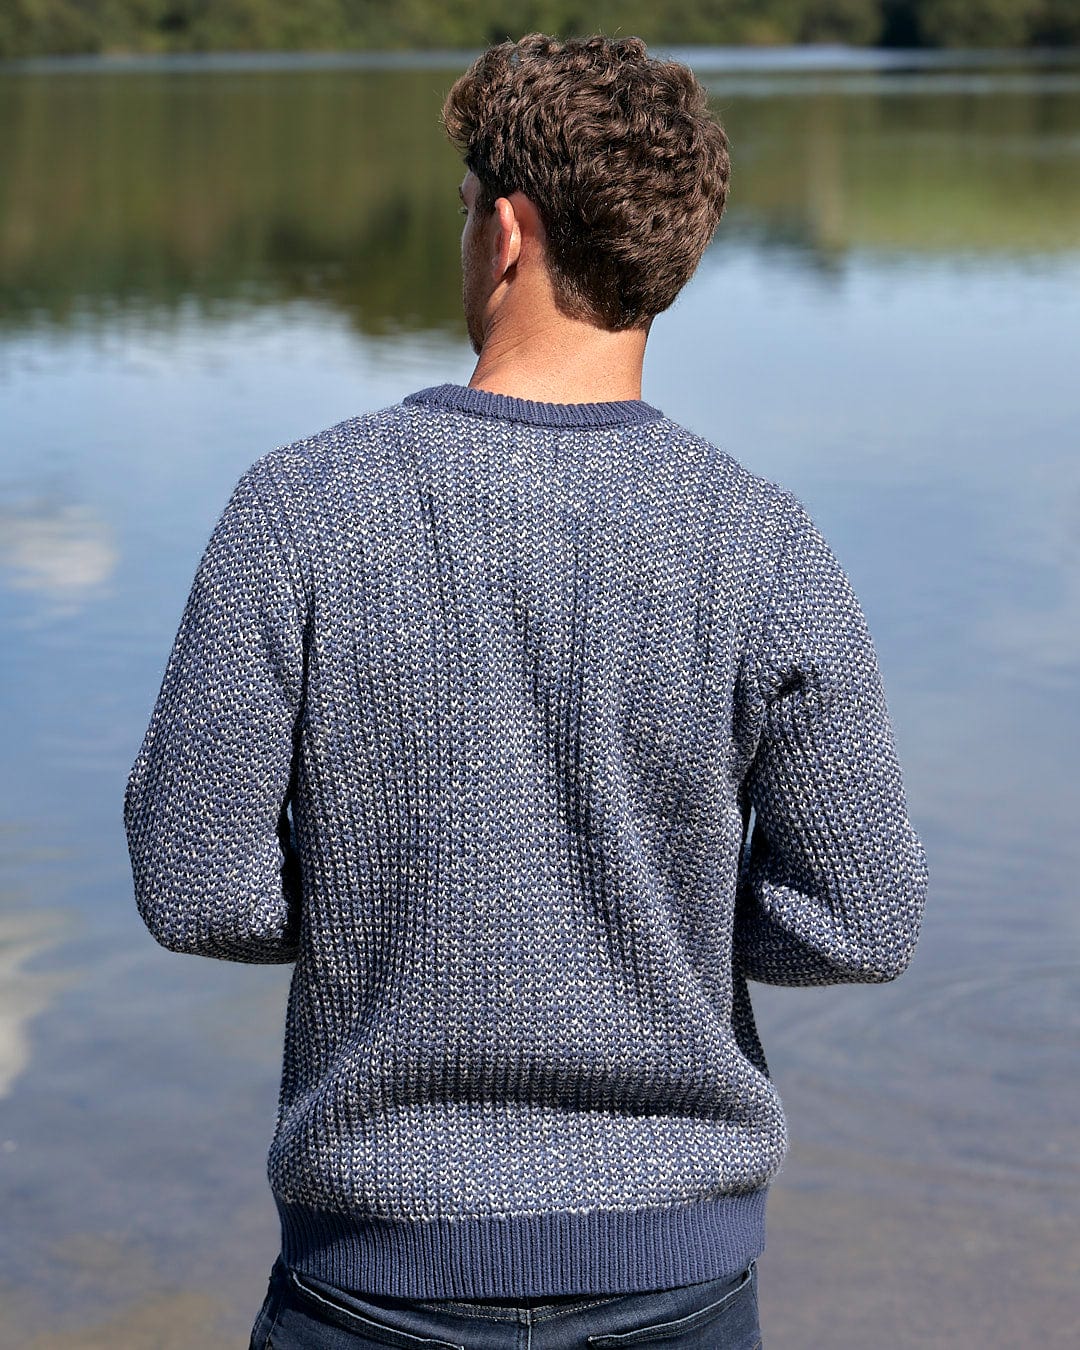 In cold weather conditions, a man is standing by a body of water wearing the Saltrock Arlen Mens Crew Knit Sweater in blue.